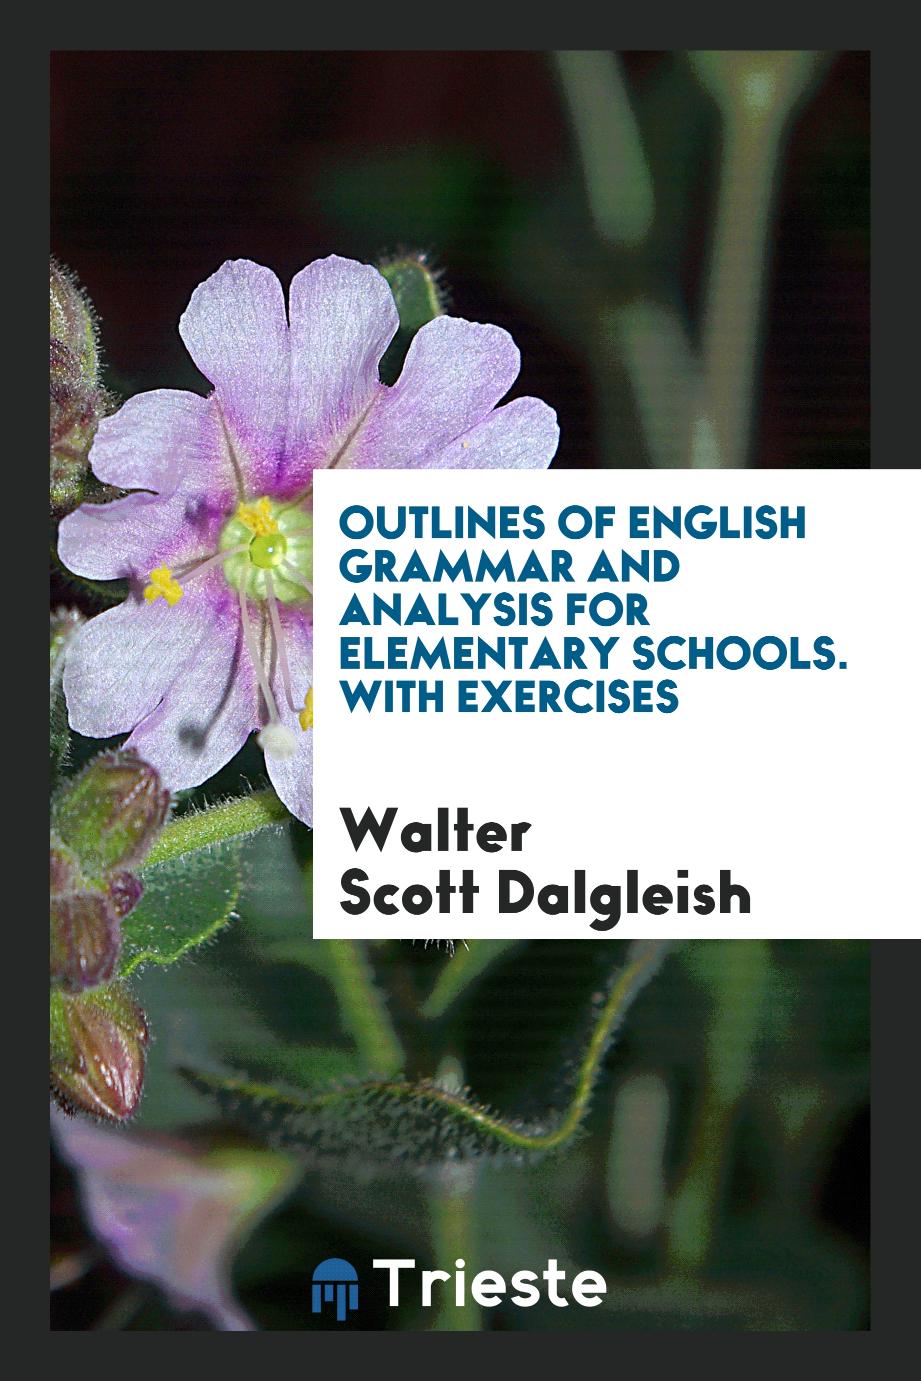 OUTLINES OF ENGLISH GRAMMAR AND ANALYSIS for elementary schools. With exercises